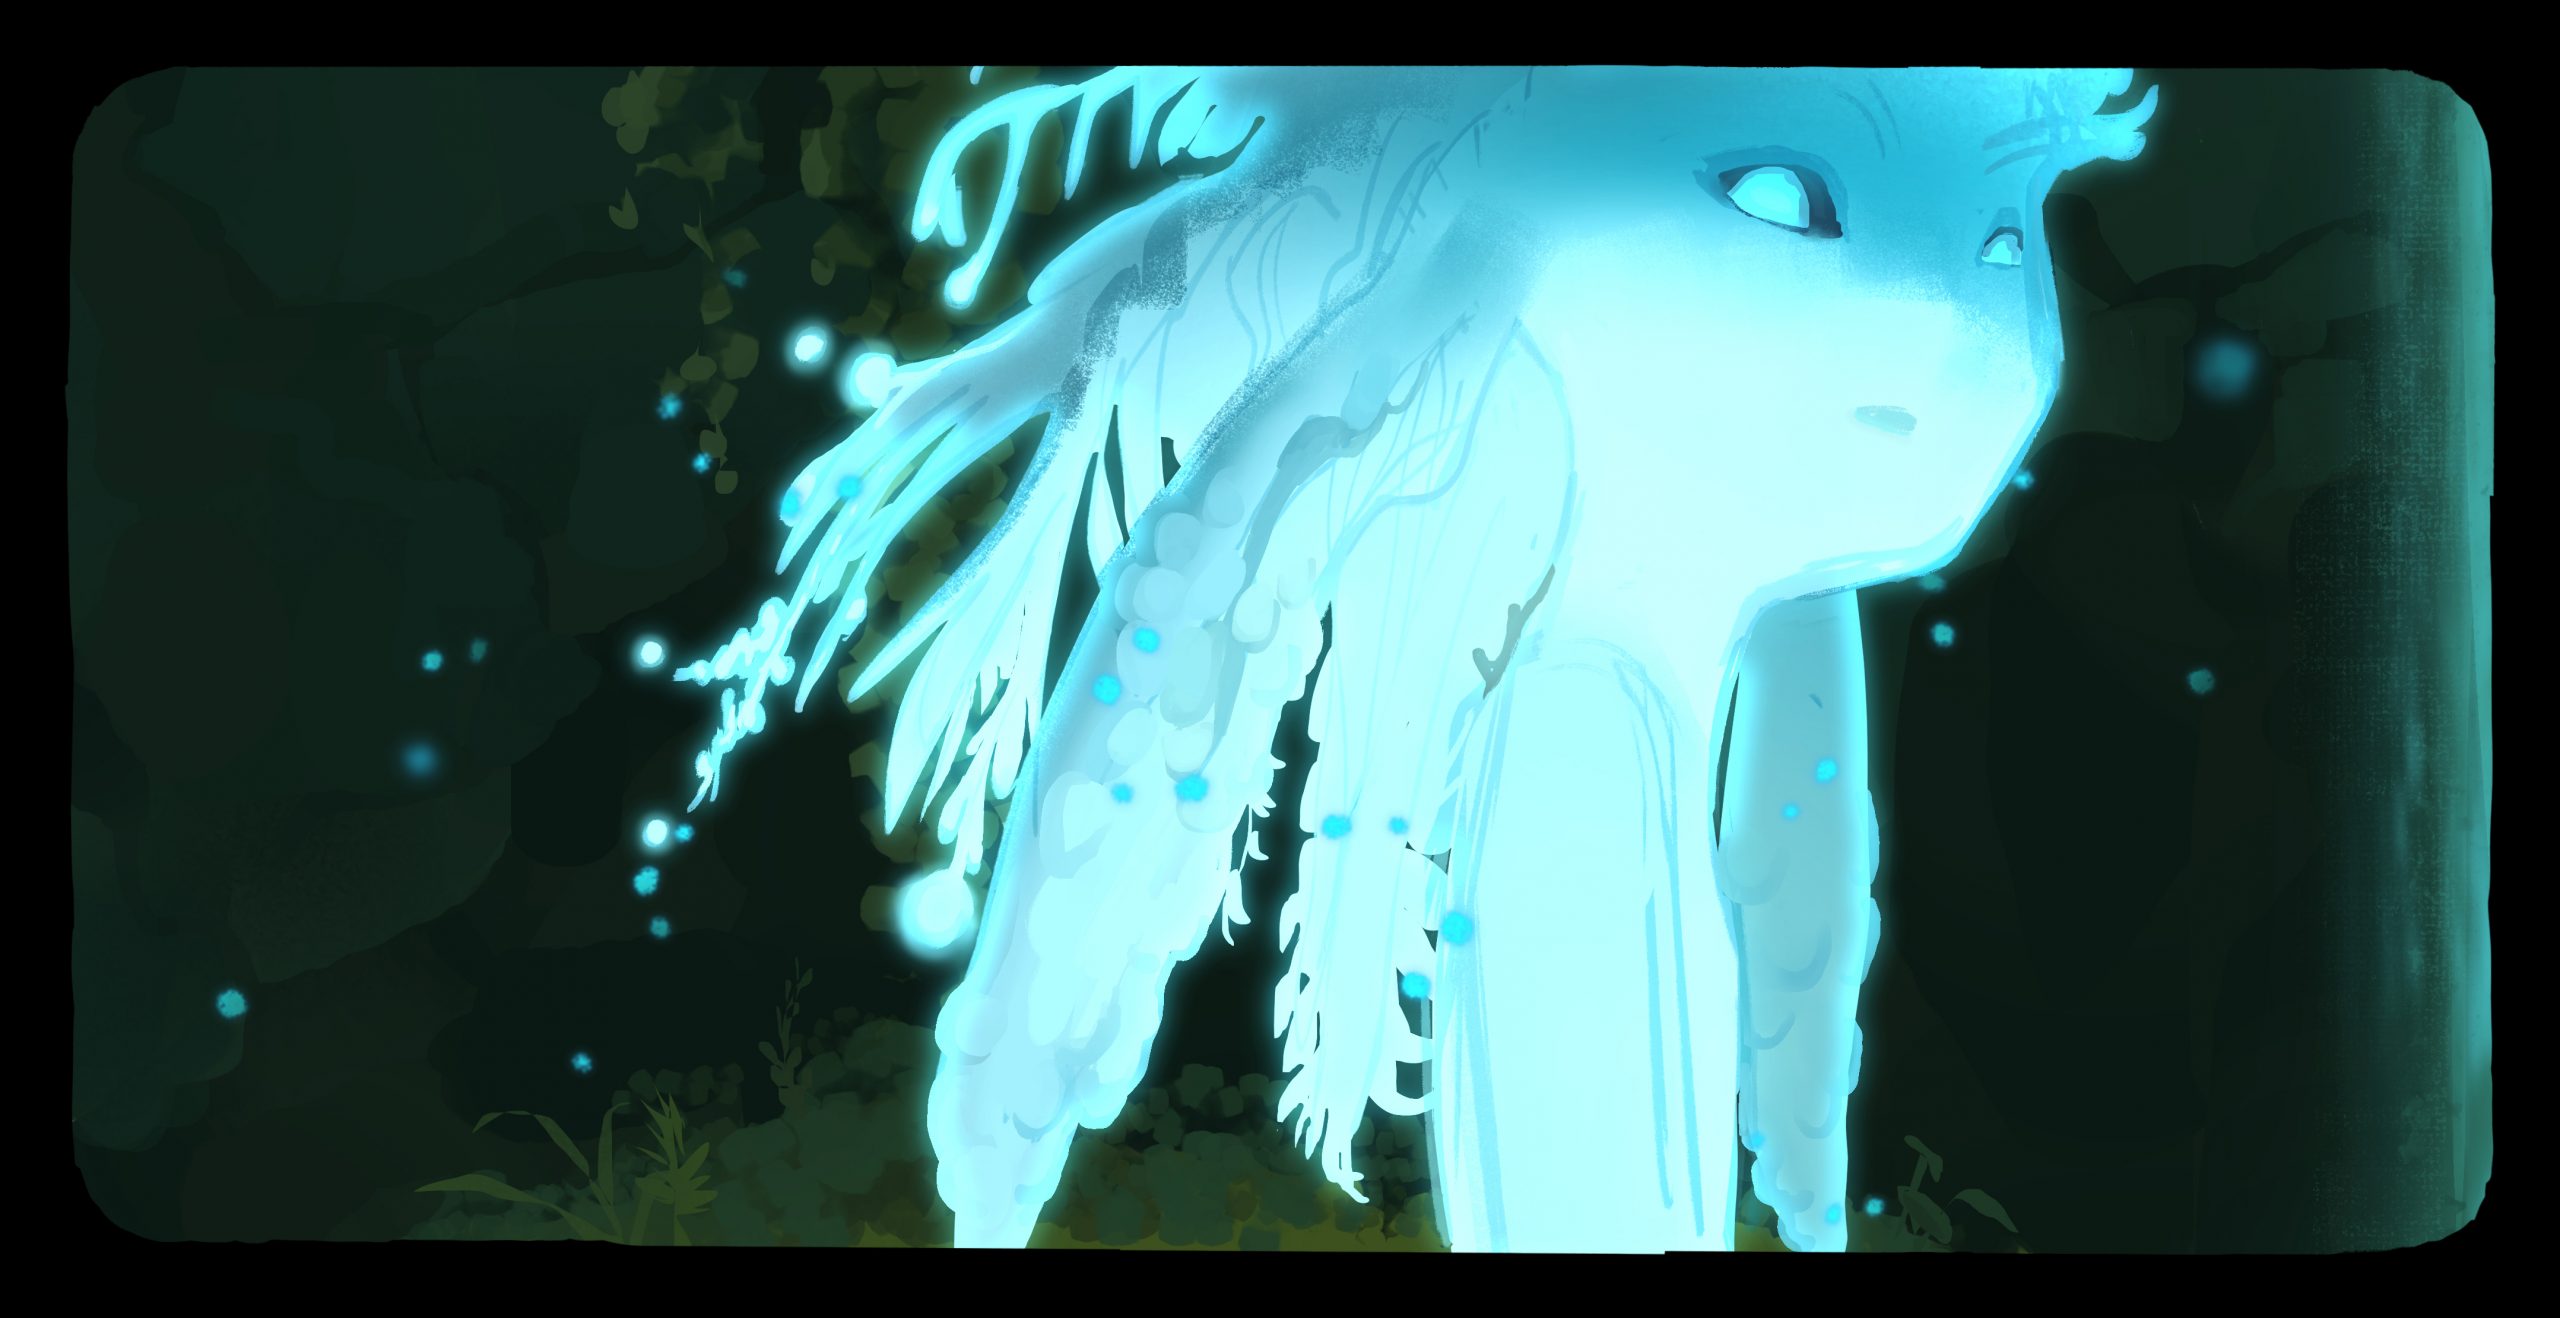 Single panel from Iris's painting, showing a close up shot of a blue forest spirit type creature